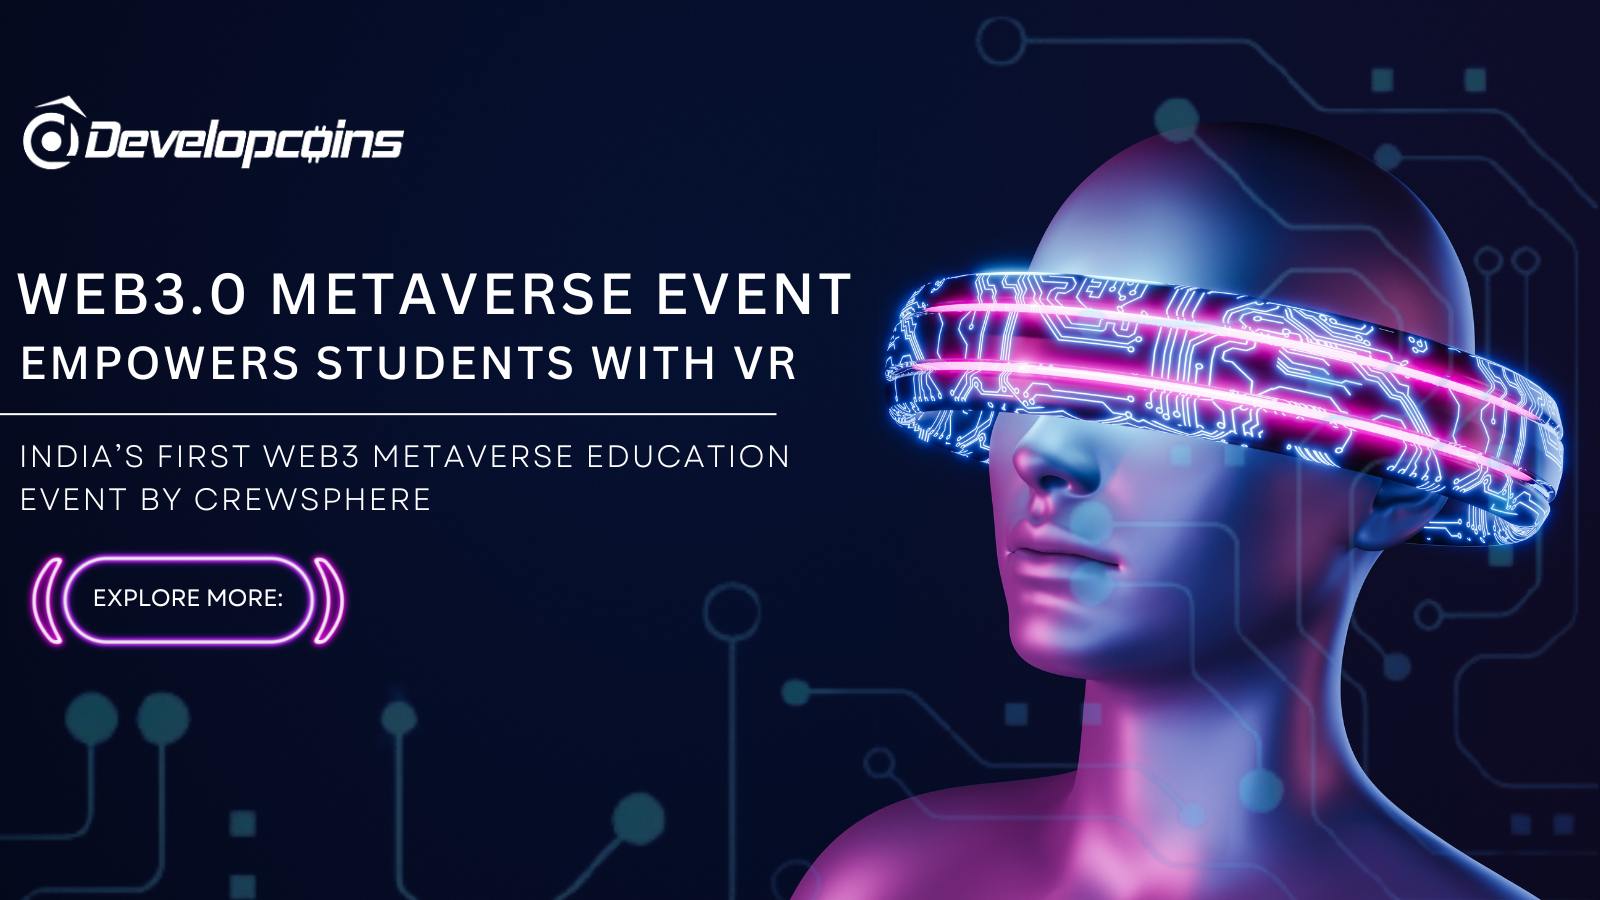 India’s First Education Web3.0 Metaverse Event By Crewsphere Empowers Students With Virtual Reality Technology